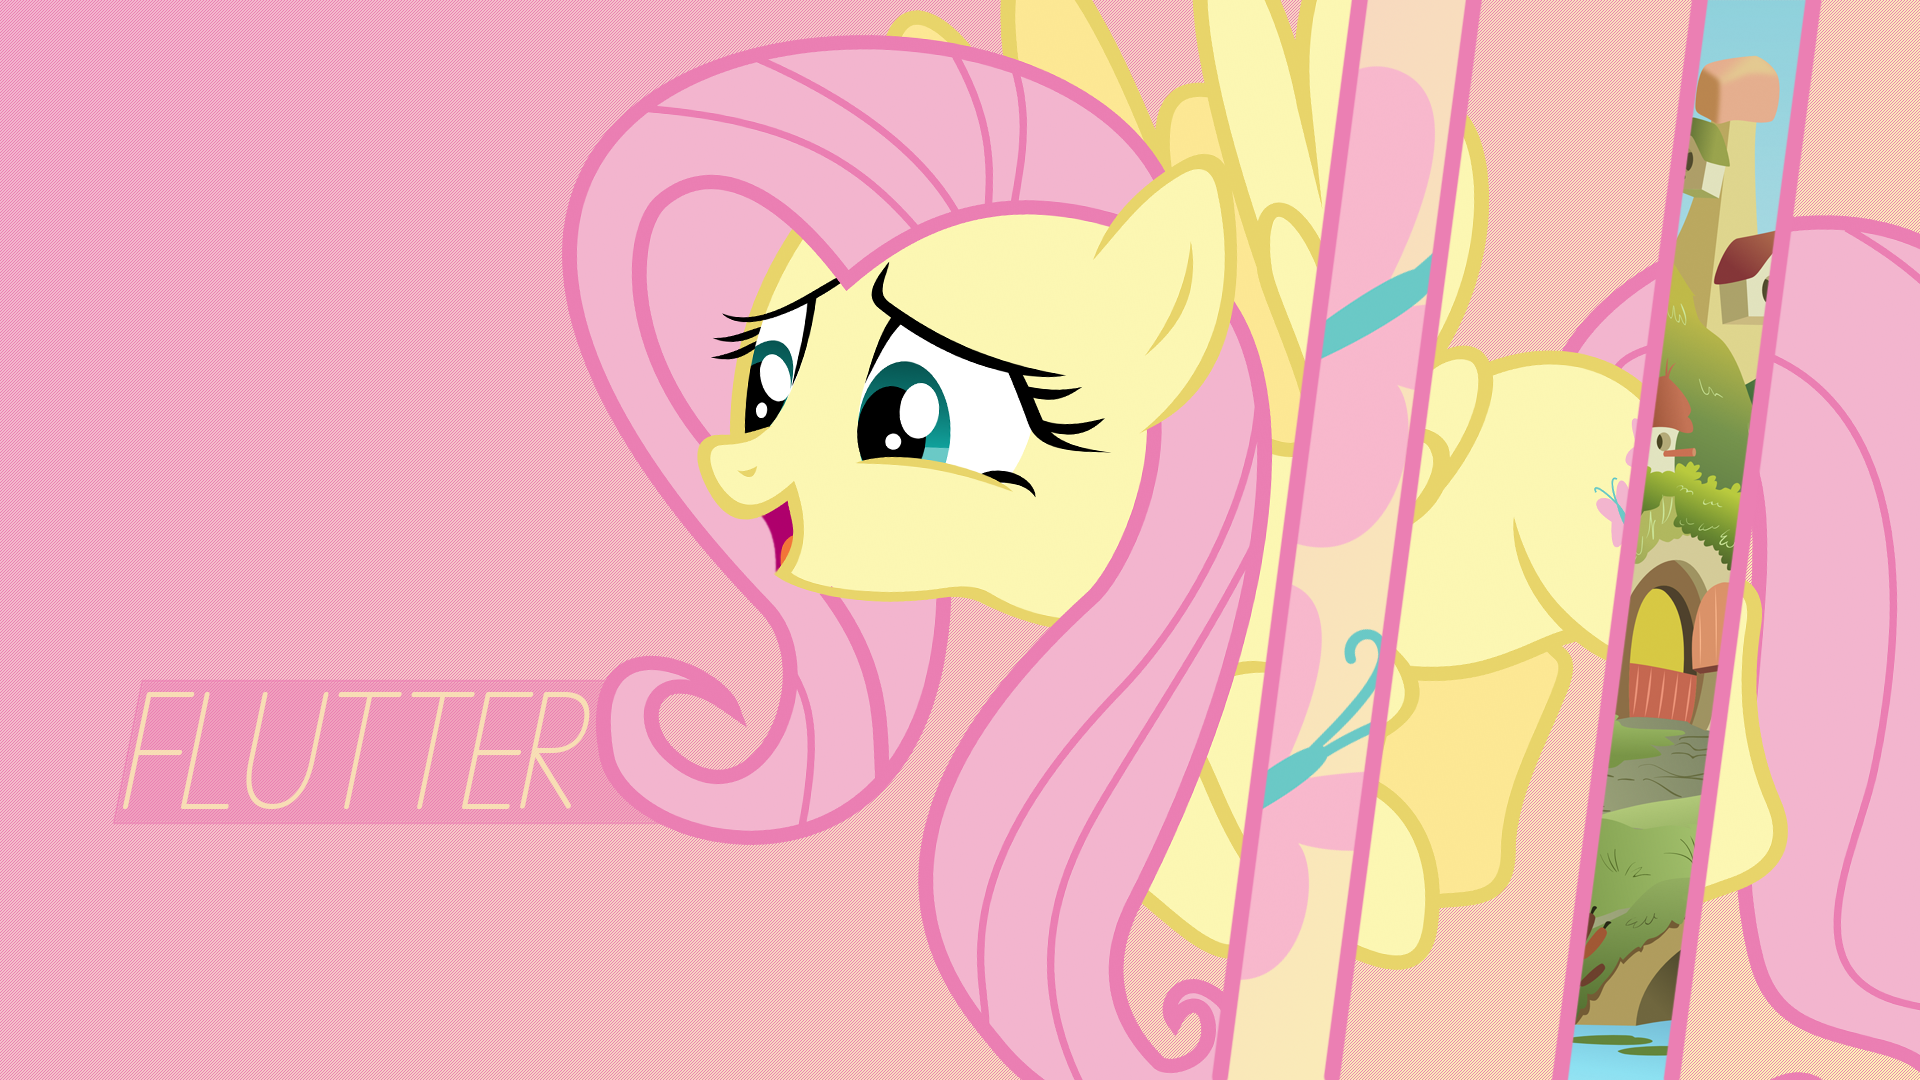 Flutter by ItsTigzz by BlackGryph0n, iOVERD, ItsTigzz and zomgmad